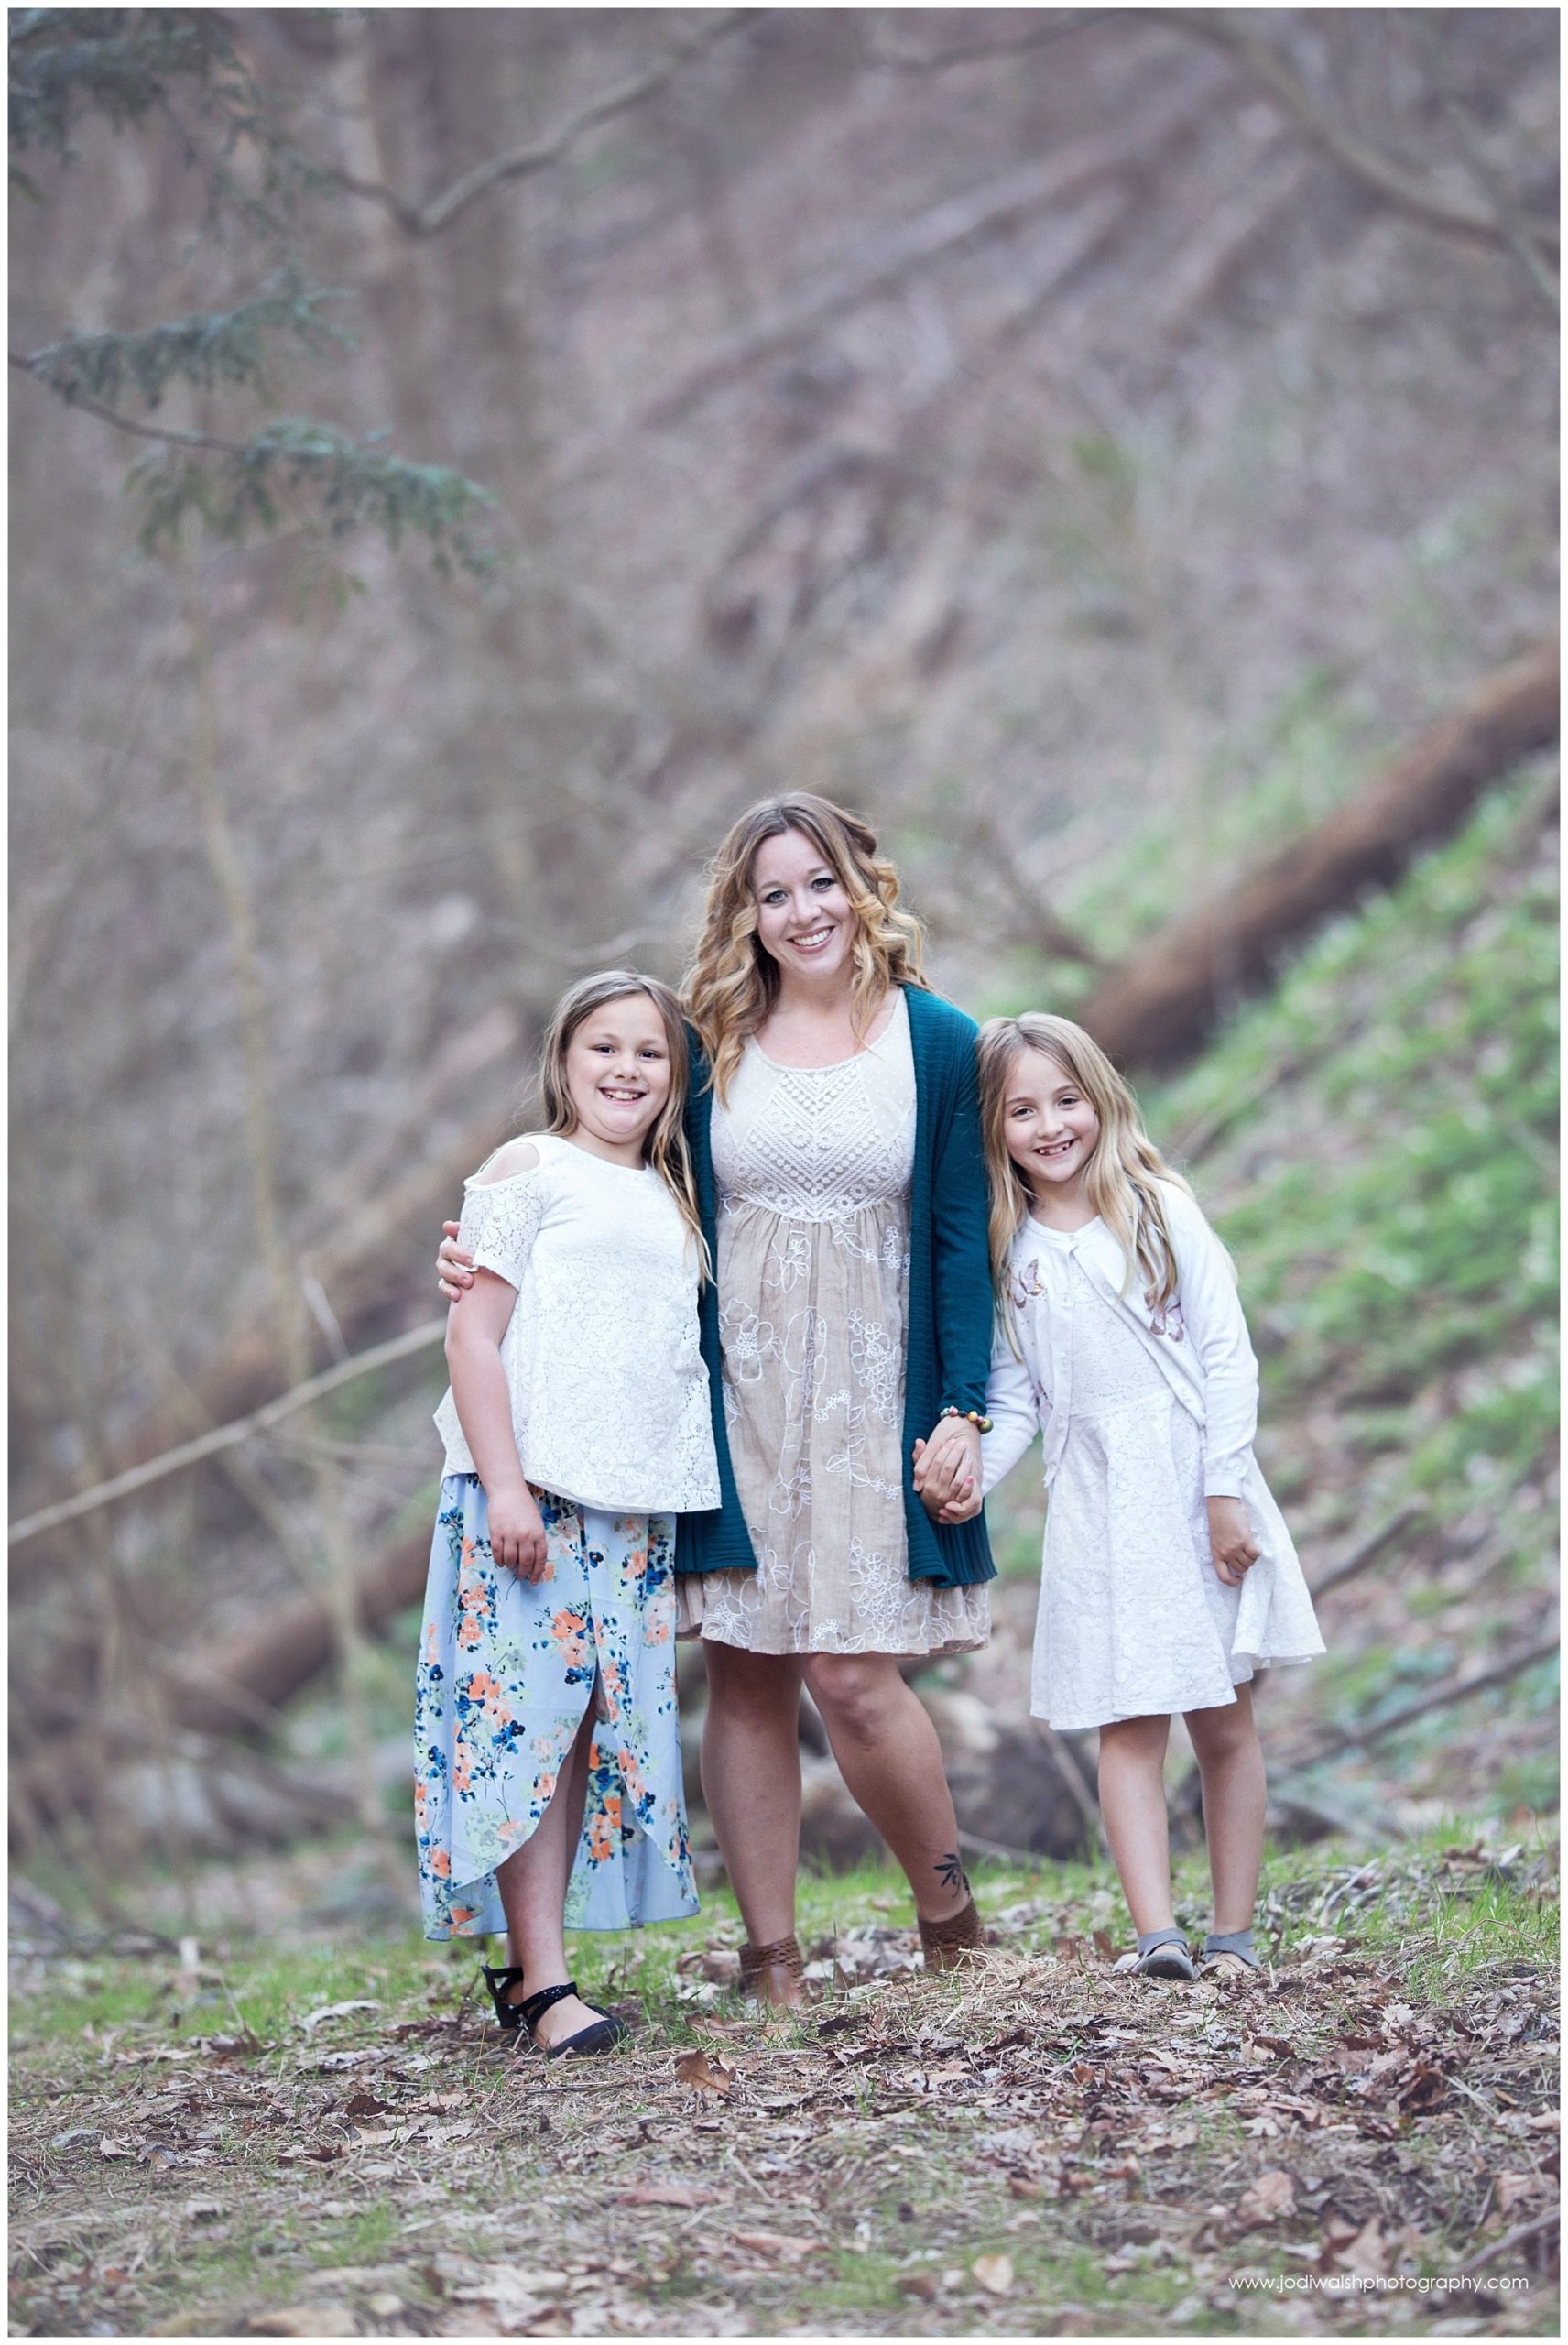 Pittsburgh area mother and daughter portrait session in wooded park